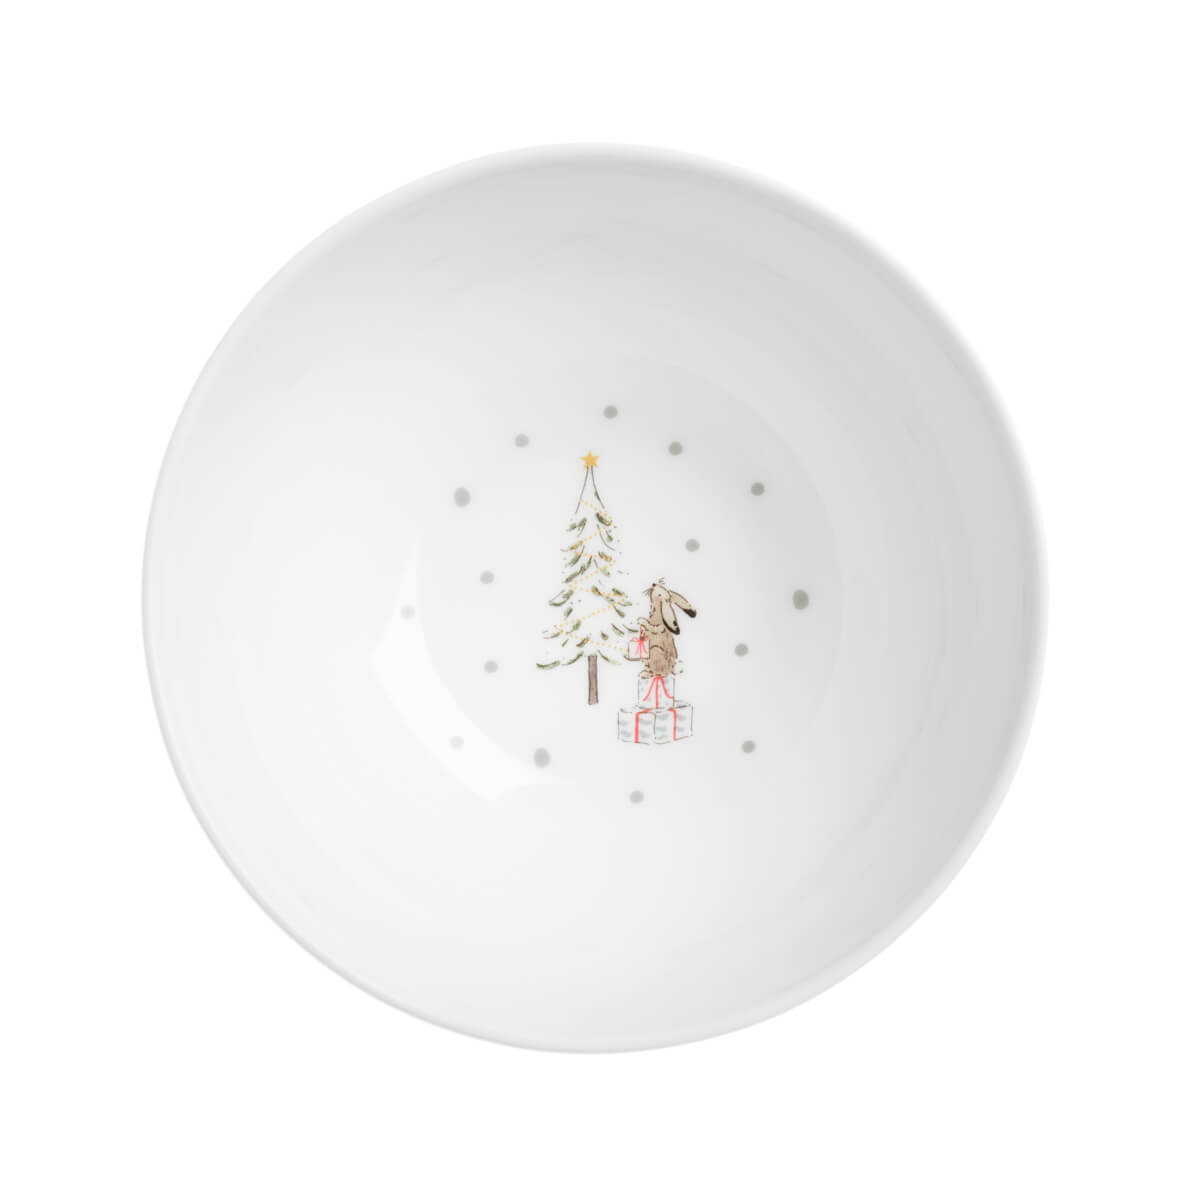 Festive Forest Nibbles Bowl by Sophie Allport